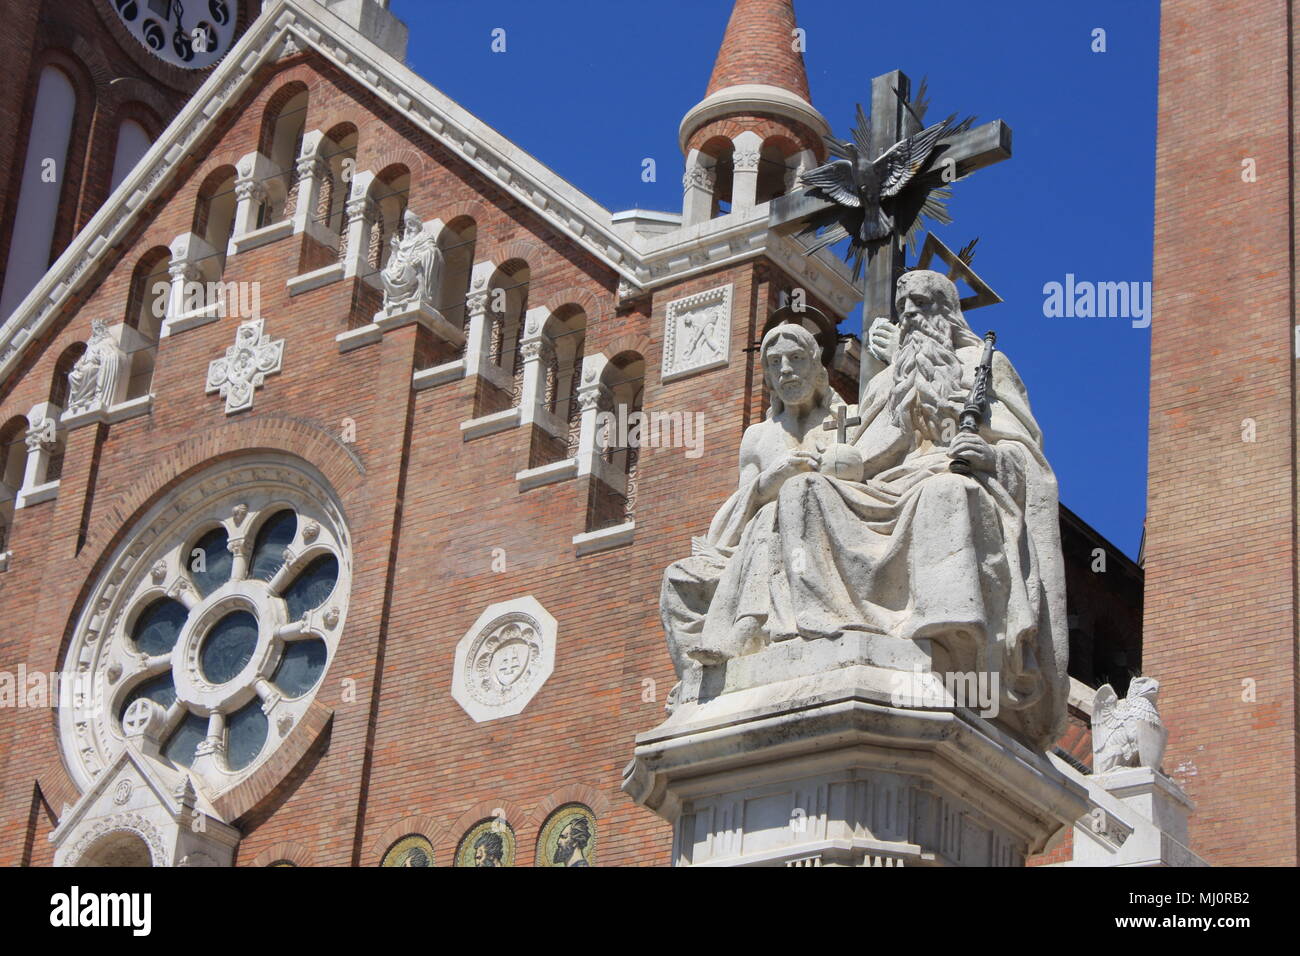 The Votive Church and Cathedral of Our Lady of Hungary is a twin-spired roman catholic cathedral in Szeged, Hungary. It lies on Dom Ter square beside Stock Photo